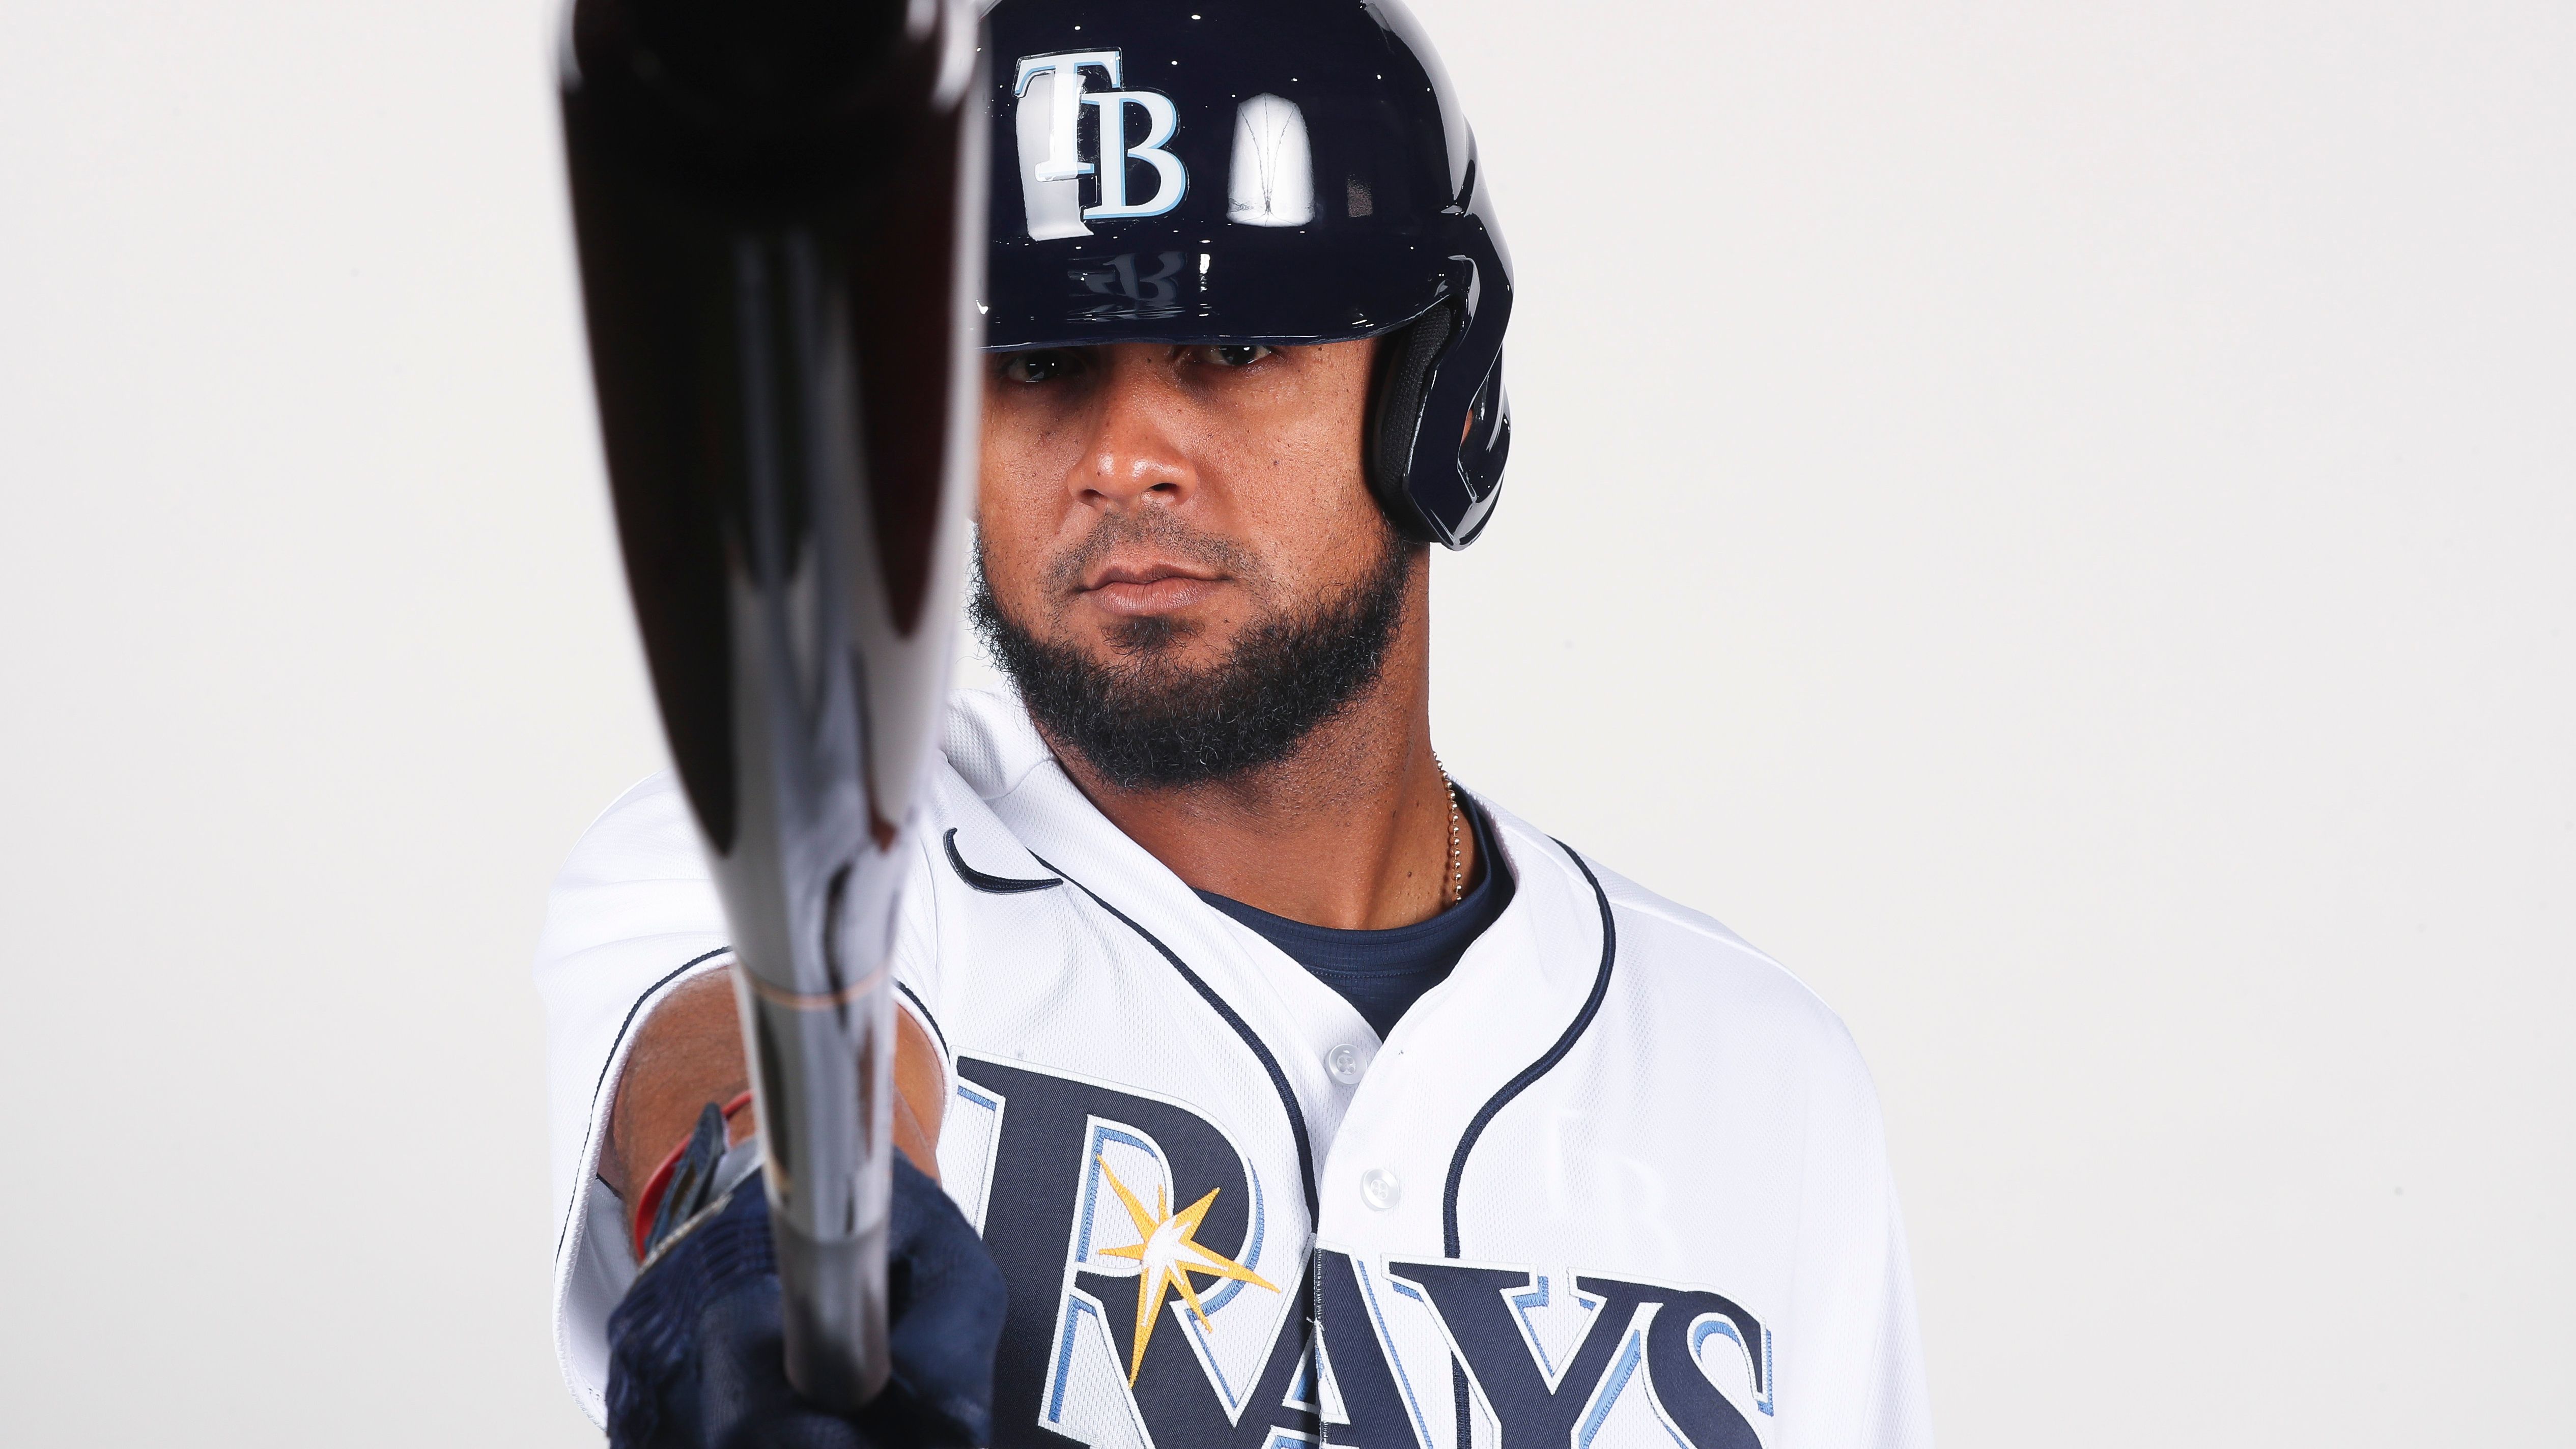 New Rays hitter Jose Martinez's passions: Baseball, coffee and giving